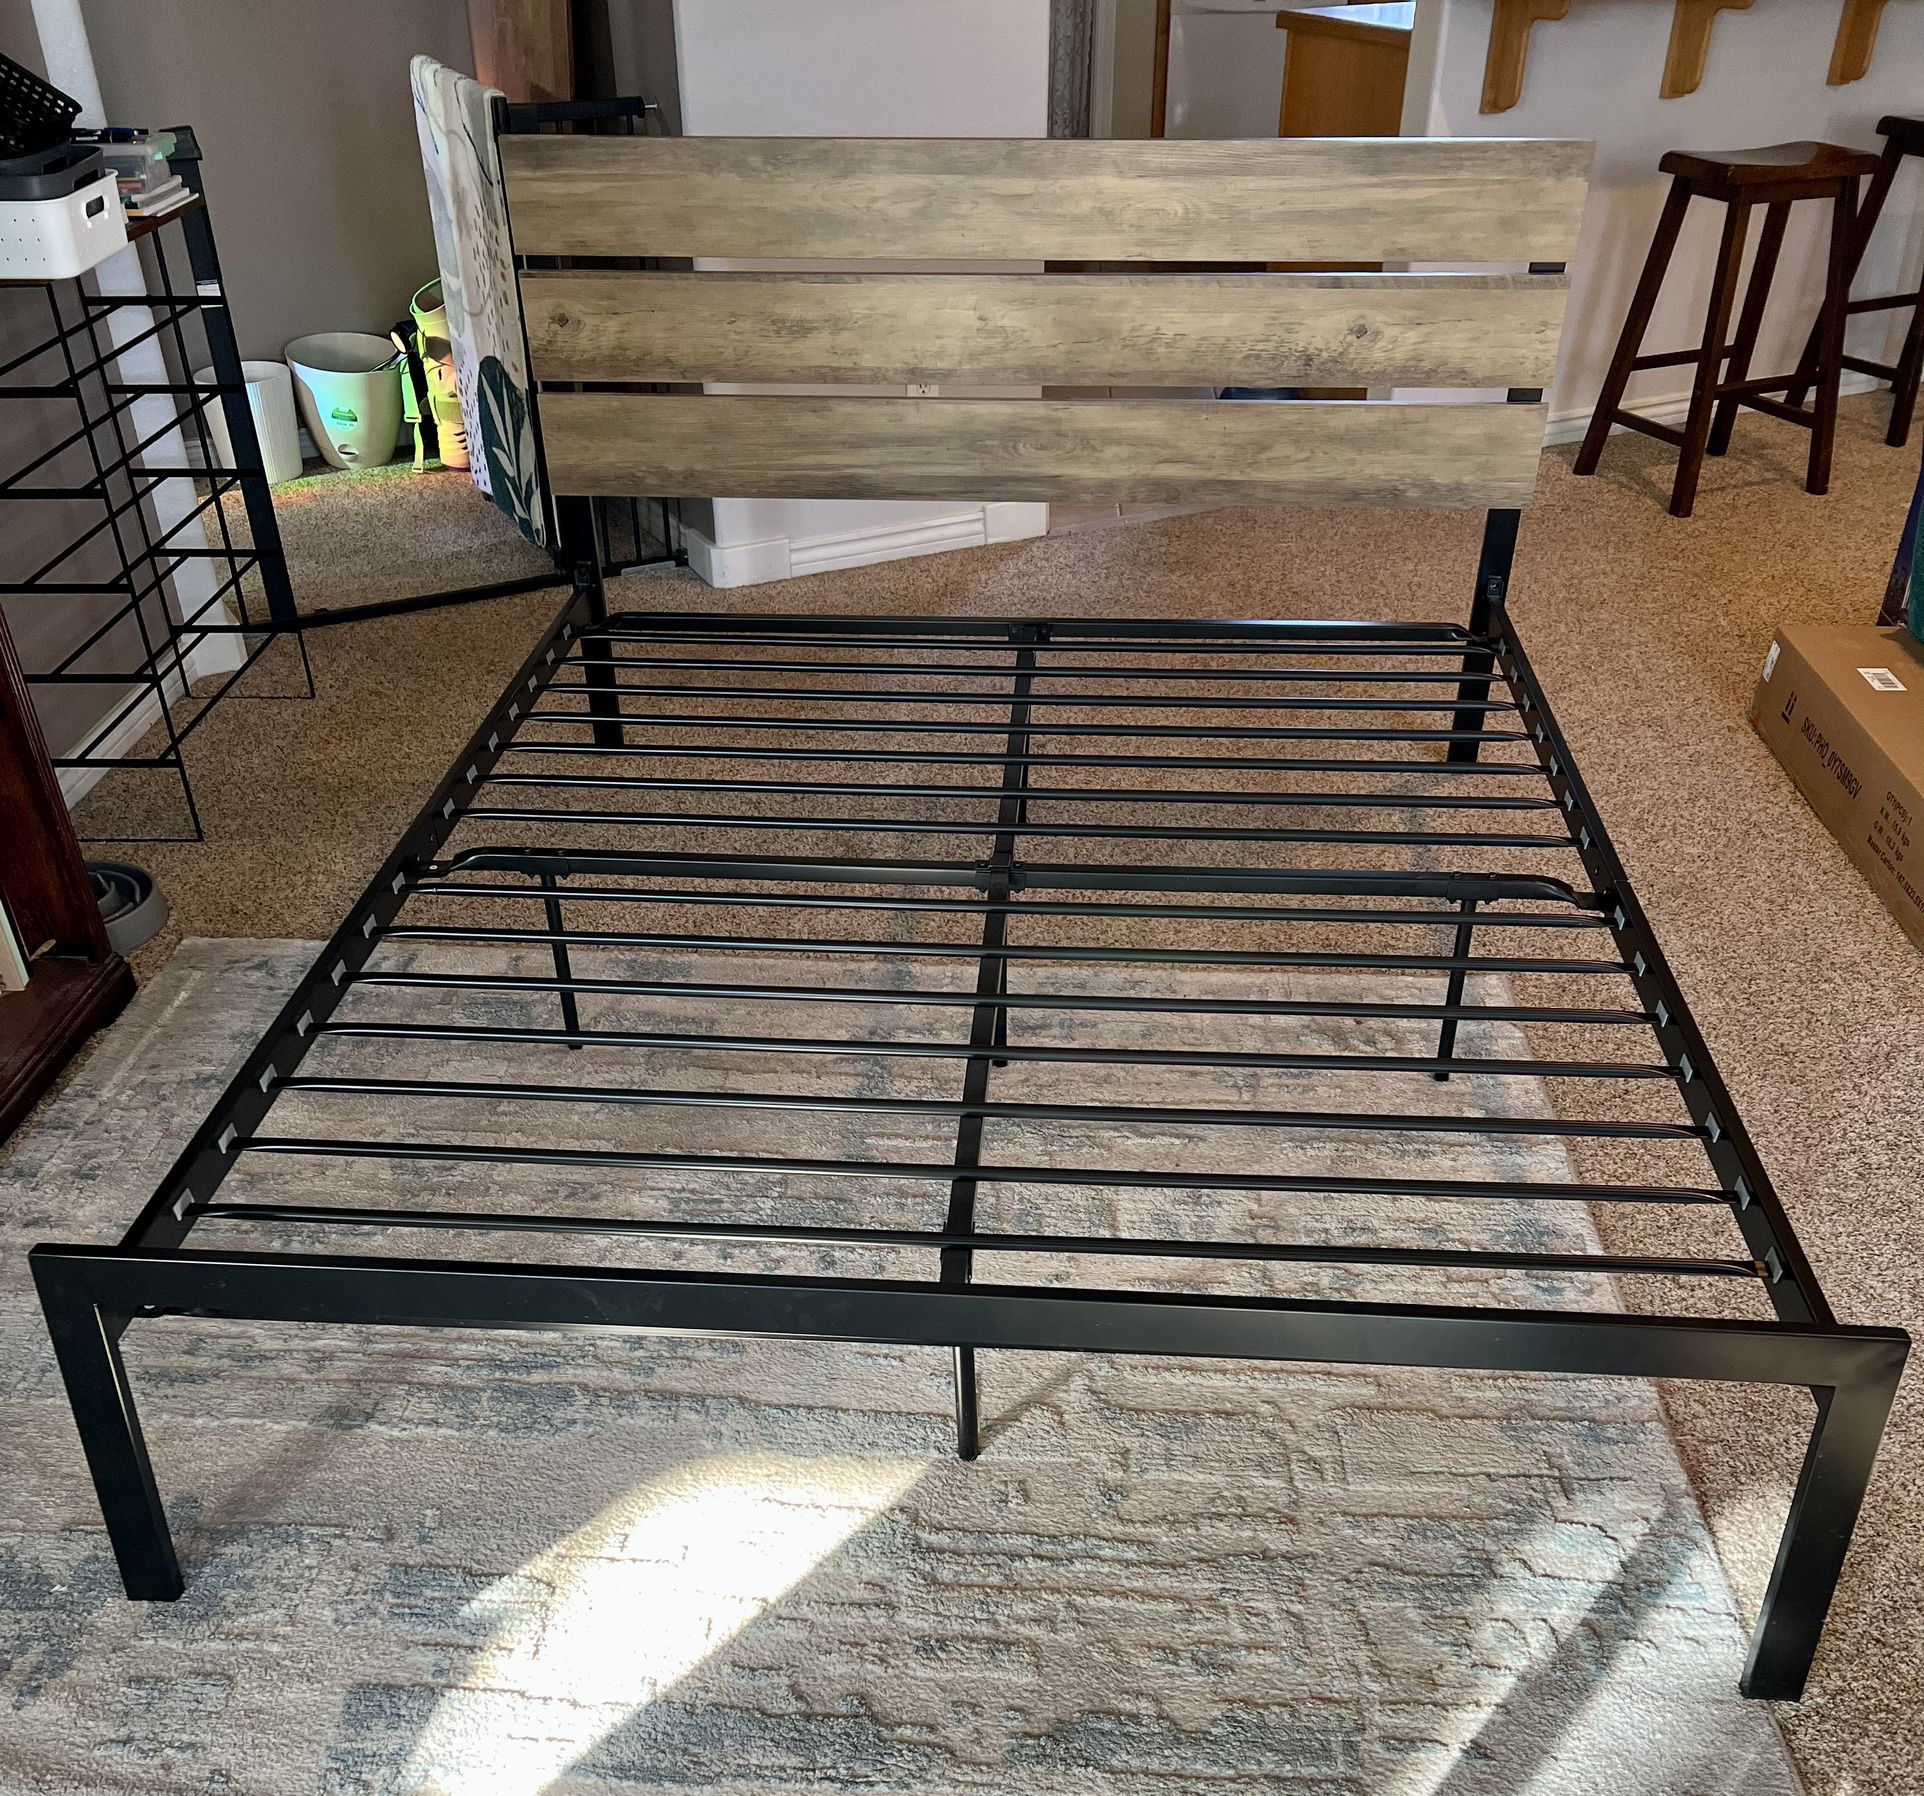 Queen Size Rustic Bed Frame 